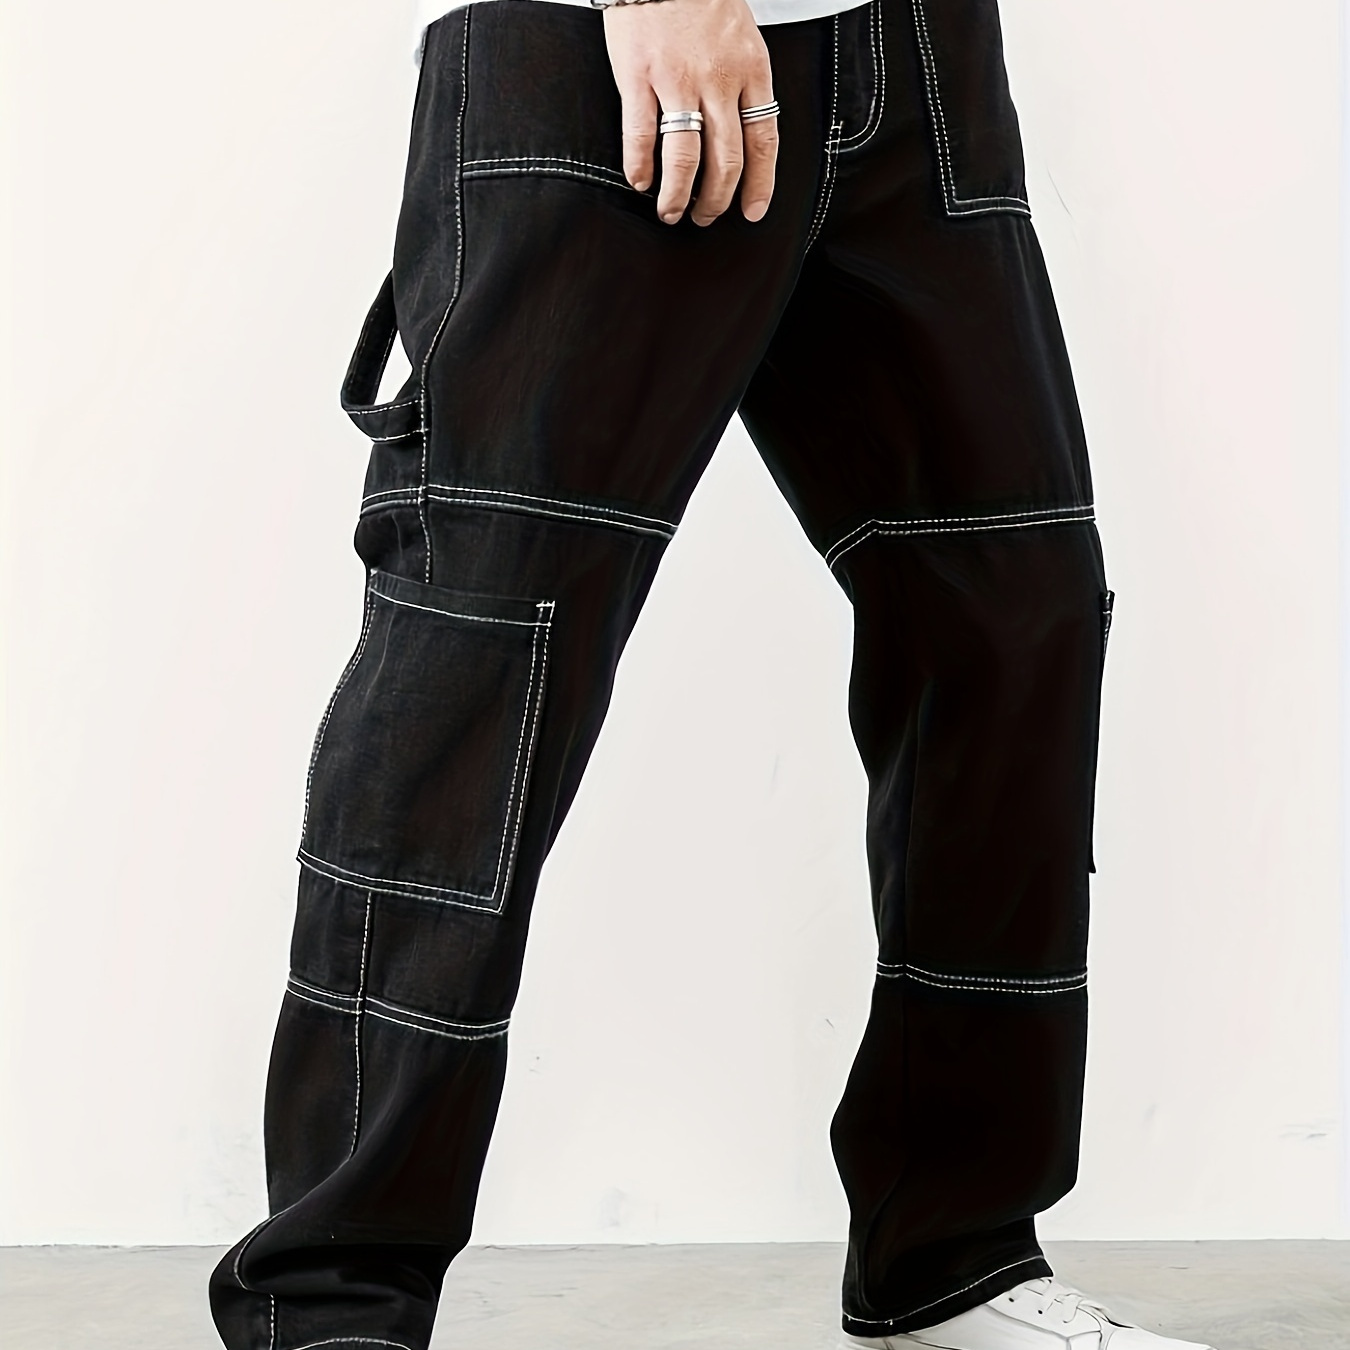 

Men's Loose Geometric Print Denim Trousers With Pockets, Causal Cotton Blend Jeans For Outdoor Activities